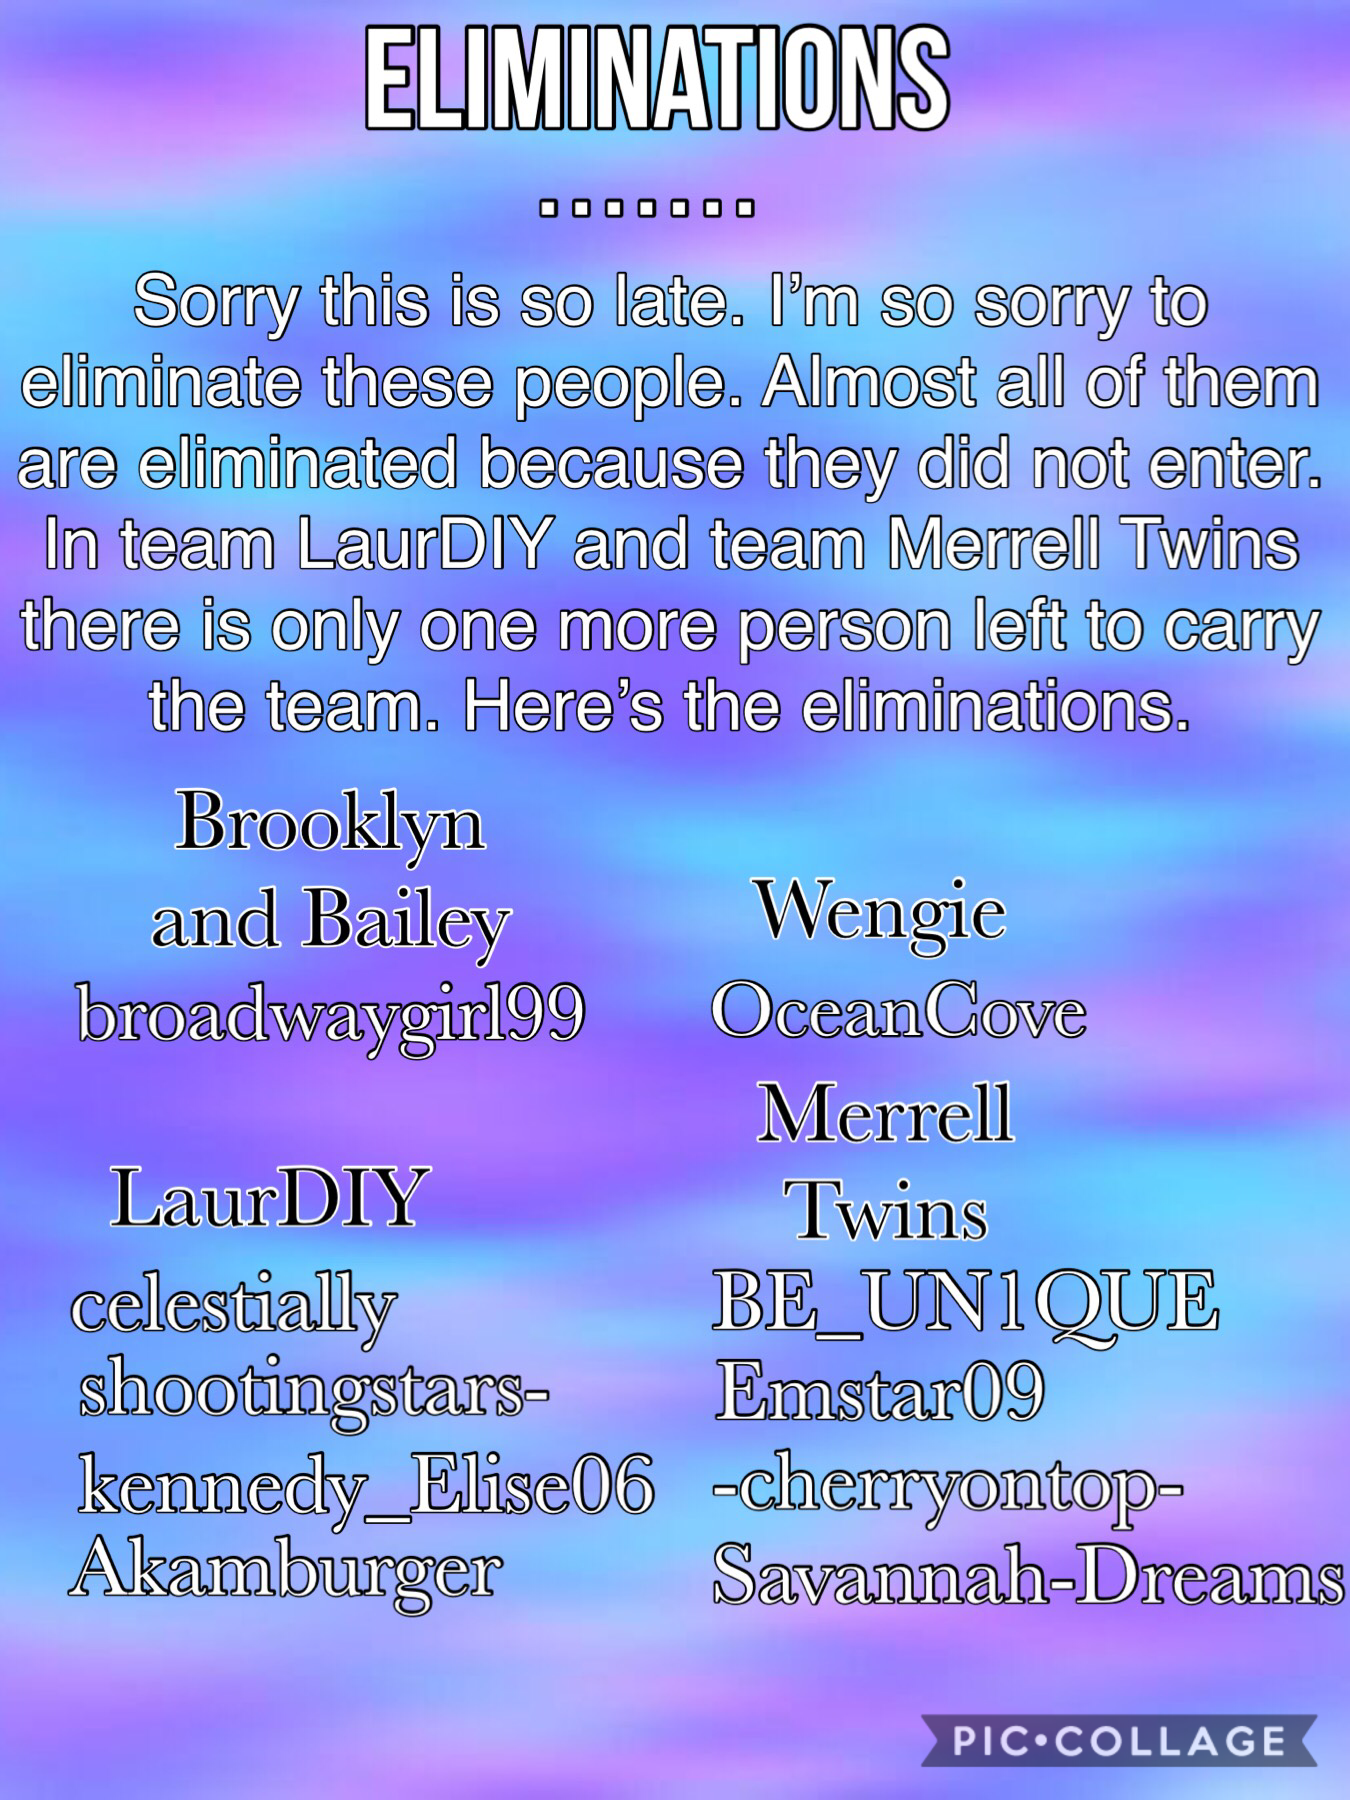 Eliminations! Sorry this is so late. Please forgive me if I had to eliminate you. Round to will be posted shortly.